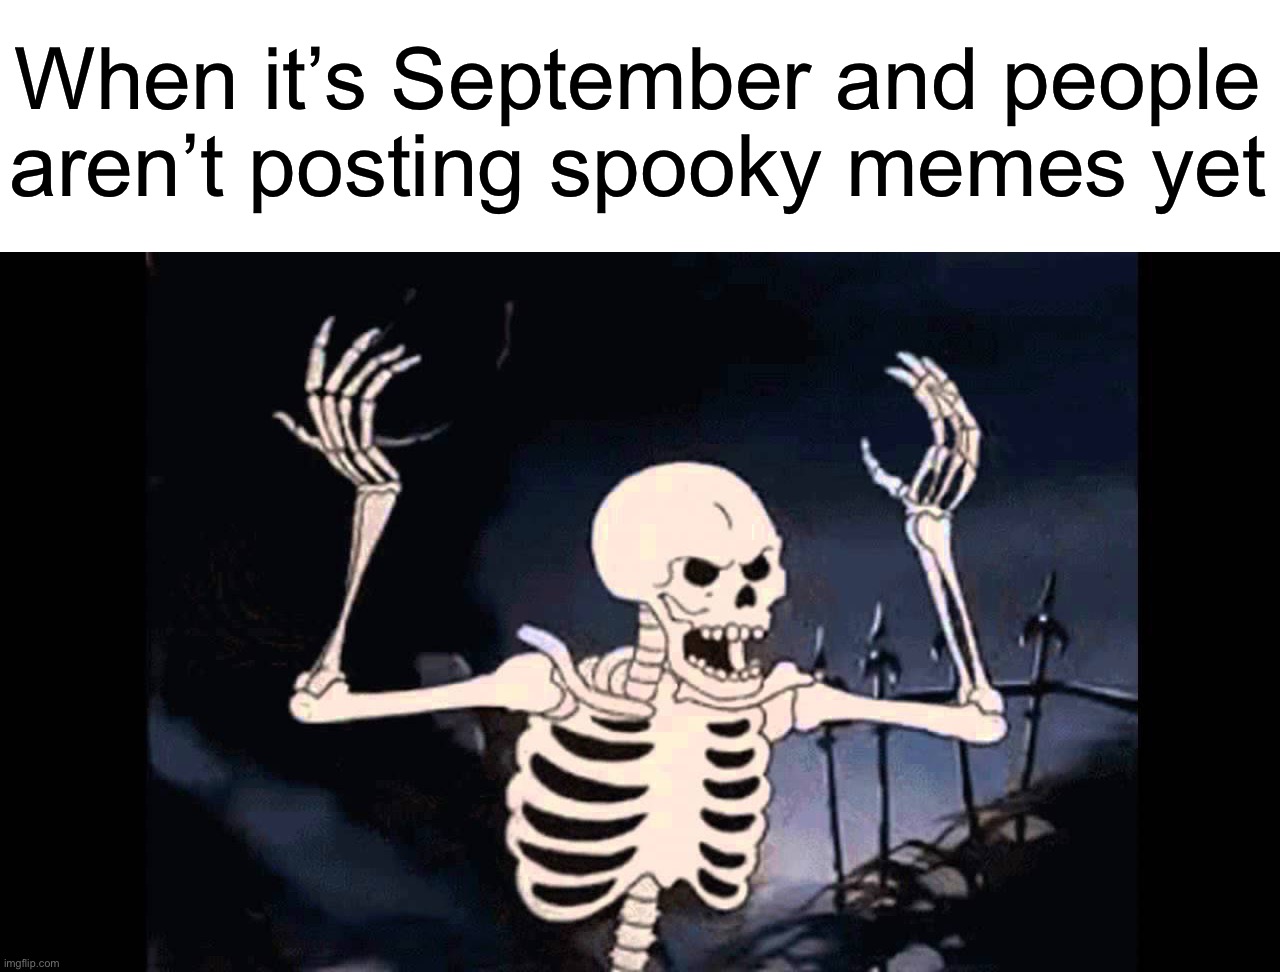 IT’S SPOOKY TIME | When it’s September and people aren’t posting spooky memes yet | image tagged in spooky skeleton,memes,funny,spooktober,spooky month,spooky scary skeletons | made w/ Imgflip meme maker